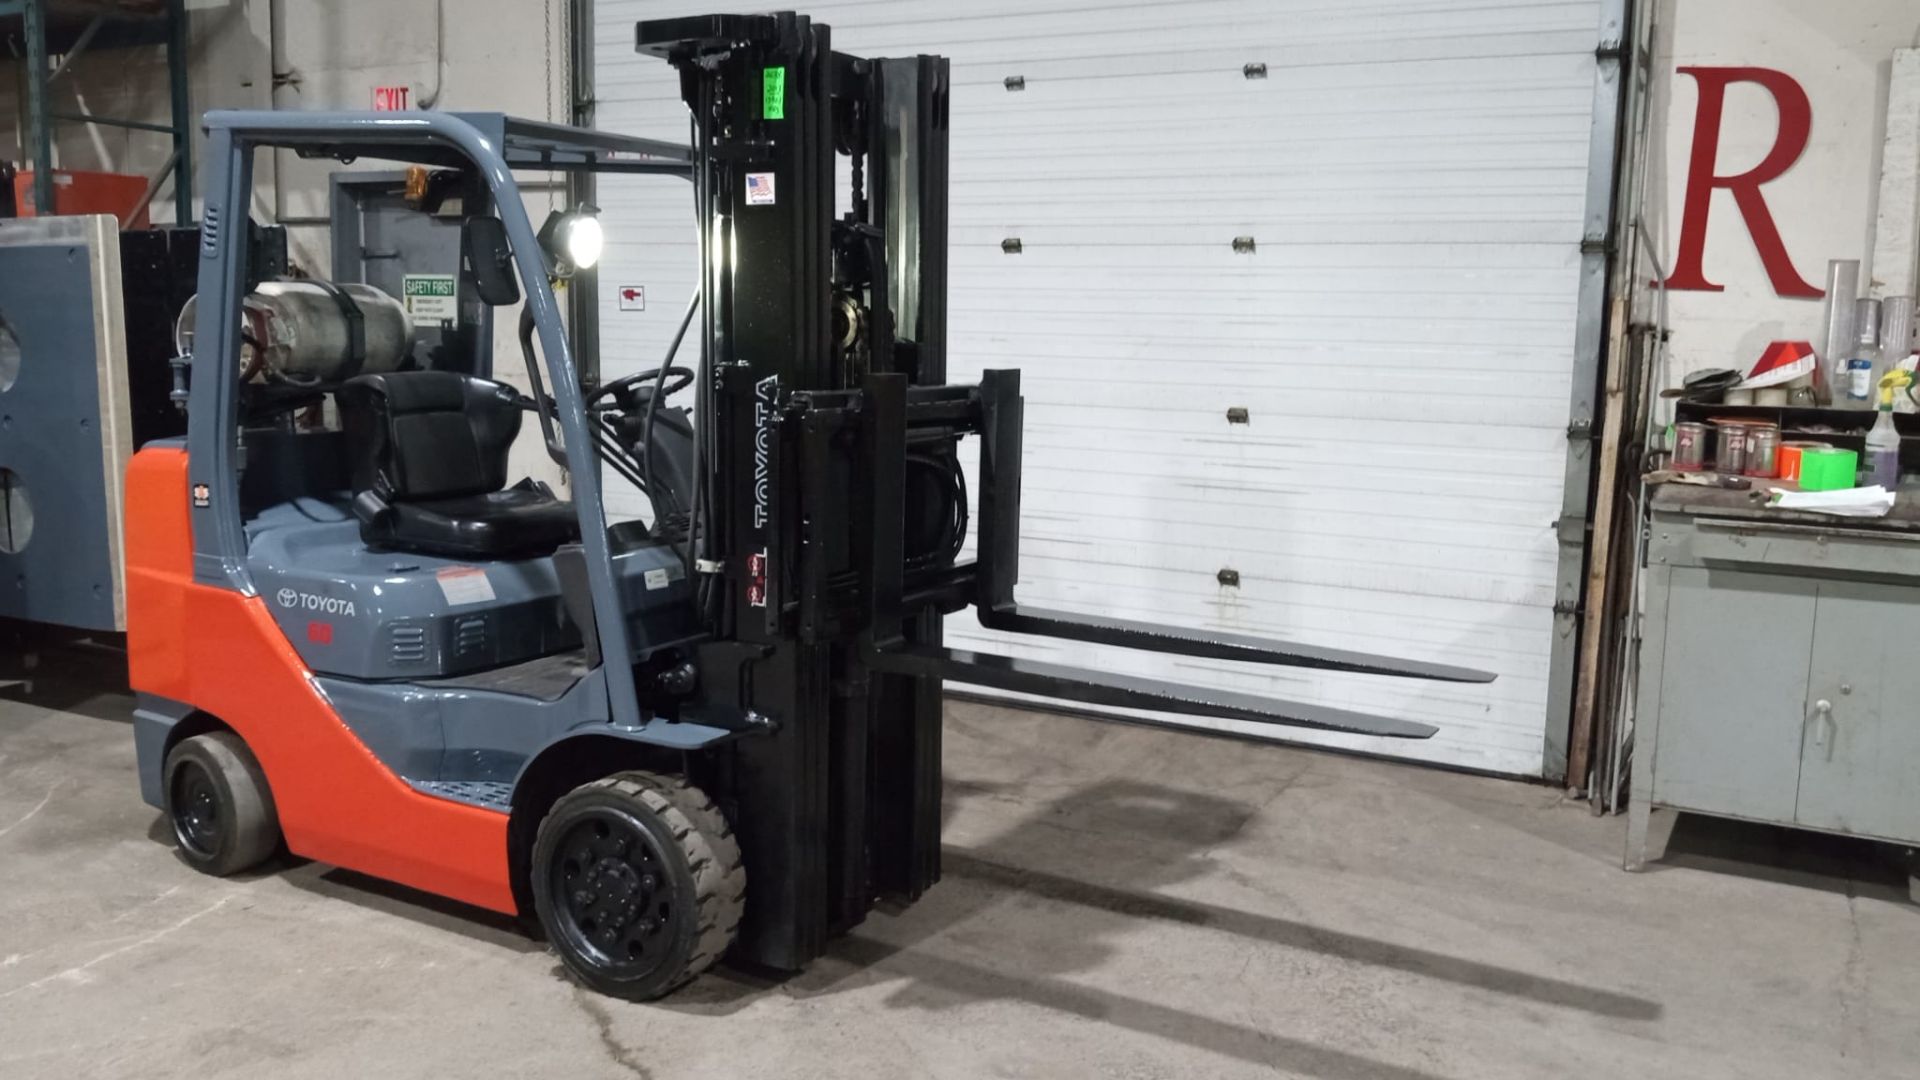 2013 TOYOTA 6,000lbs Capacity LPG (Propane) Forklift with sideshift with 3-STAGE MAST & tires with - Image 2 of 6